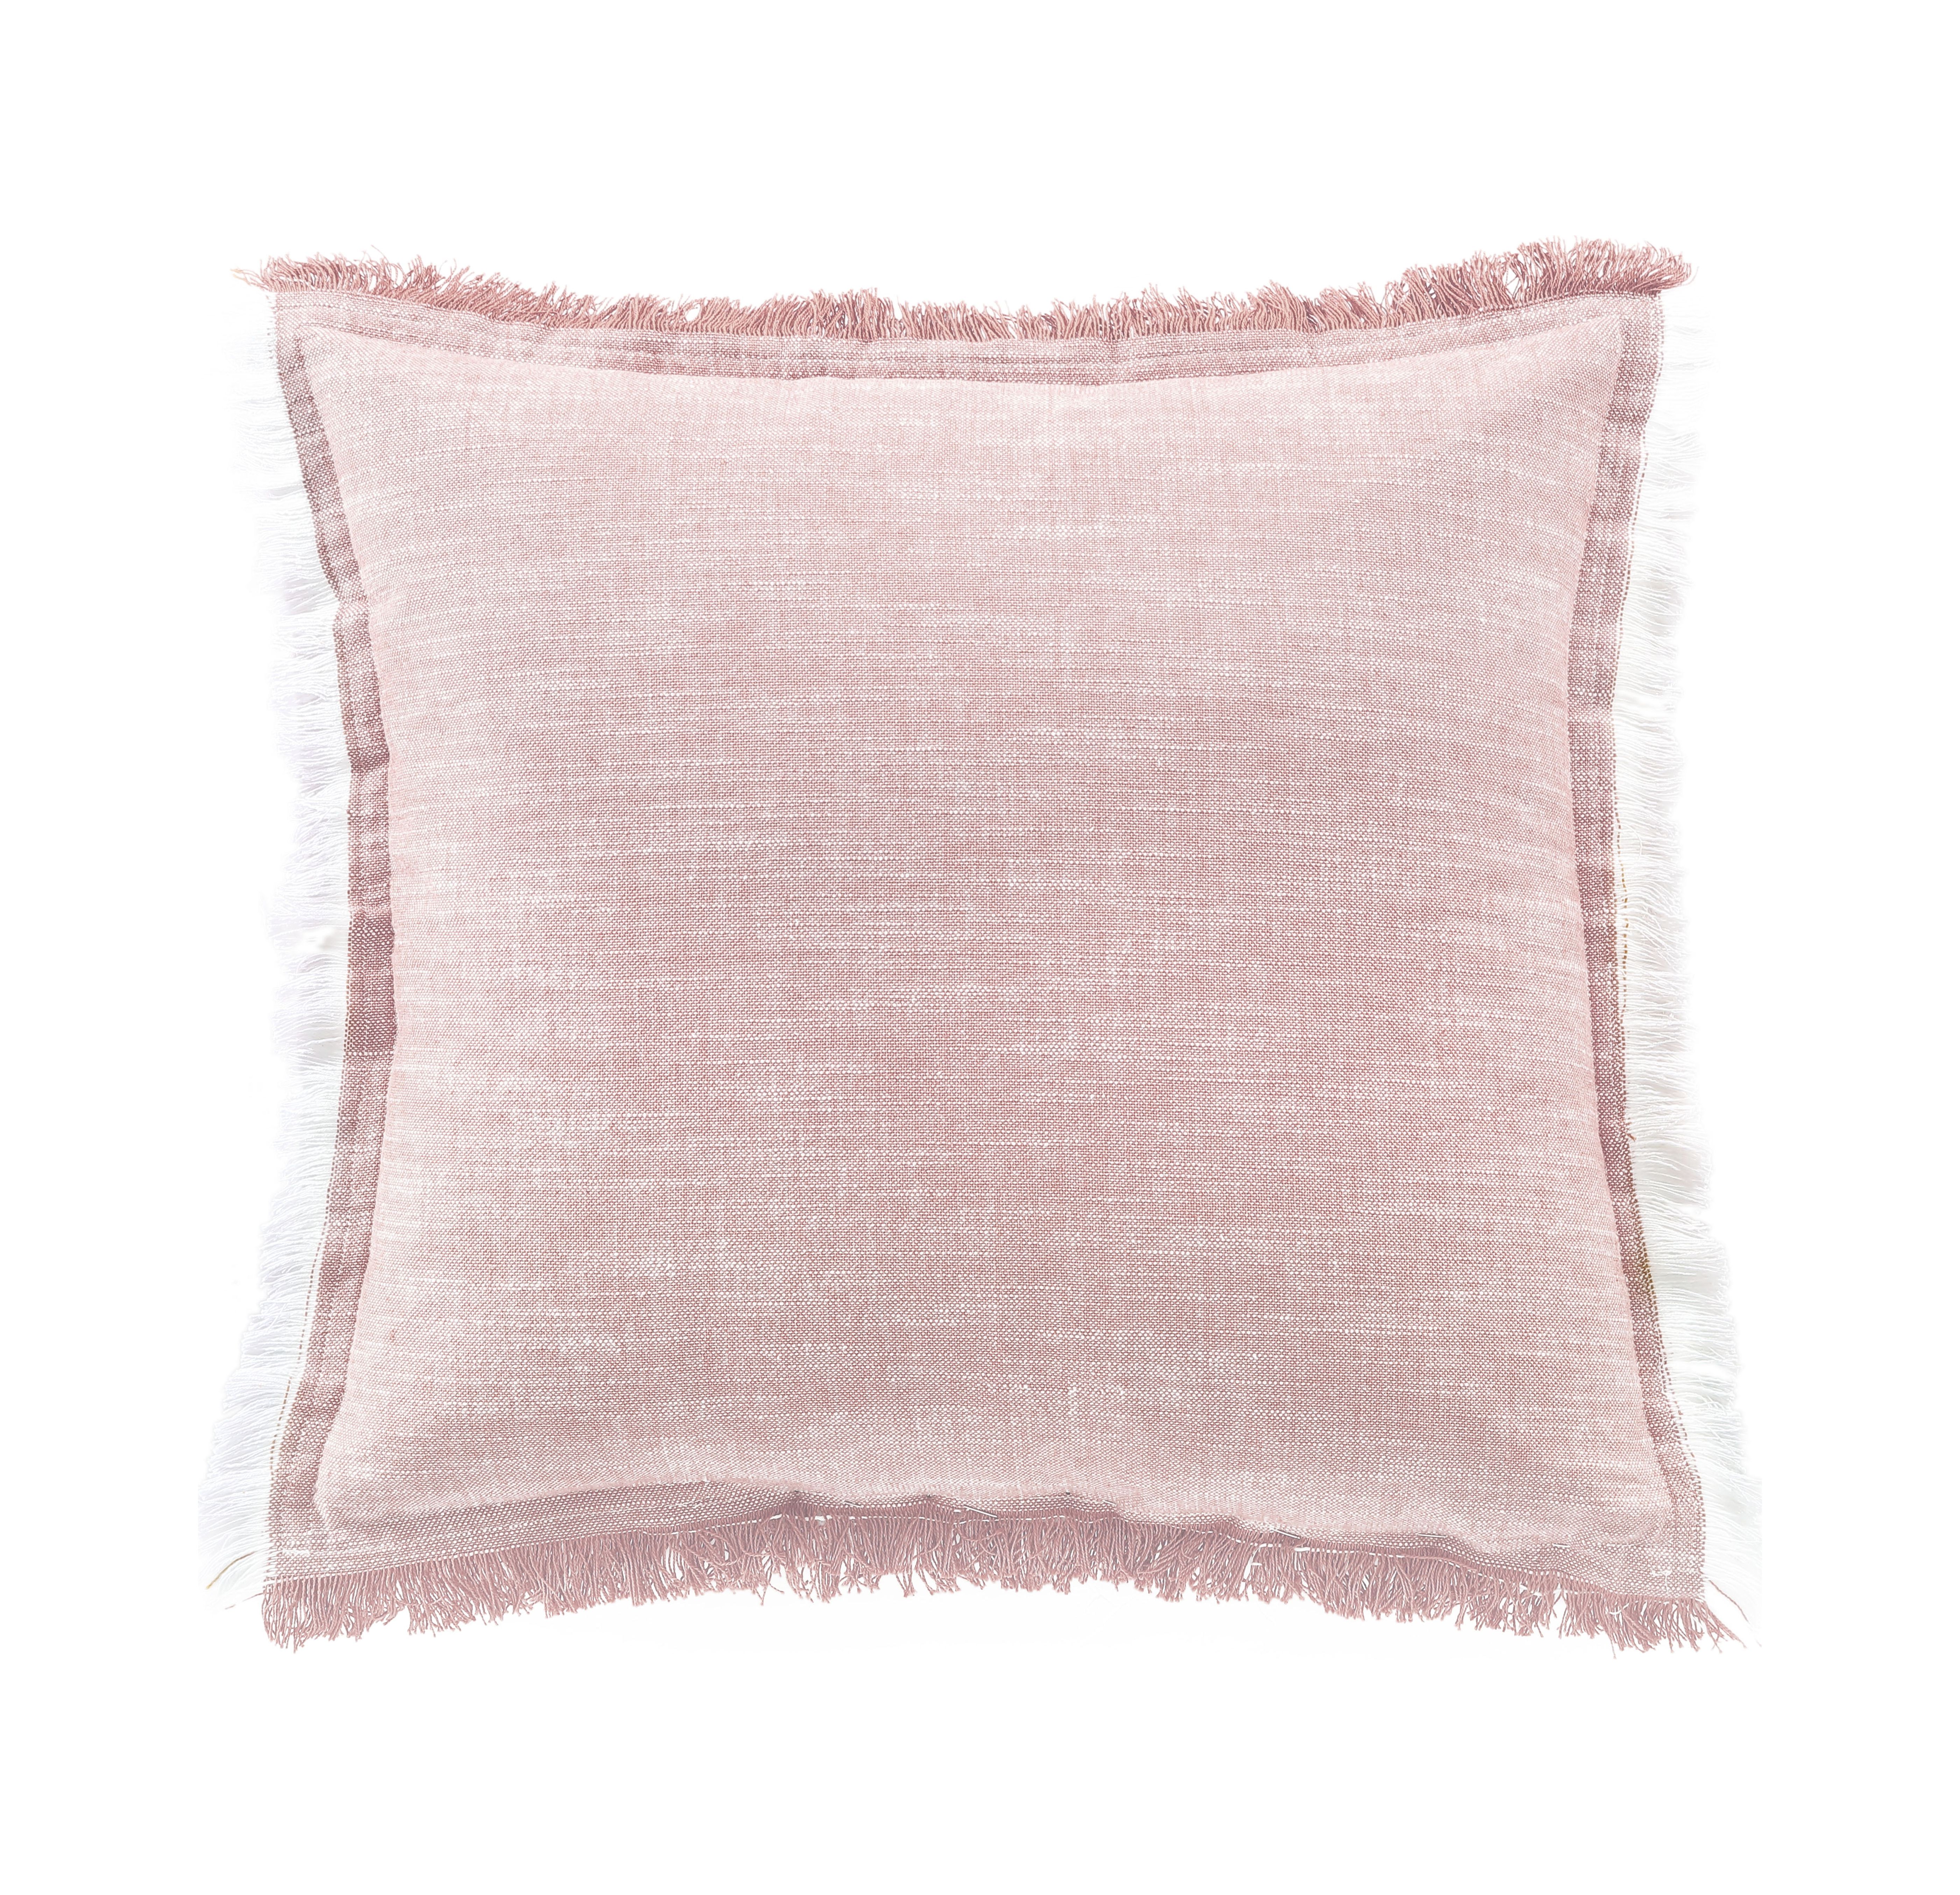 Better Homes & Gardens, Blush Throw Pillows, Square, 20" x 20", Rose Blush, 2 Pack - image 2 of 5